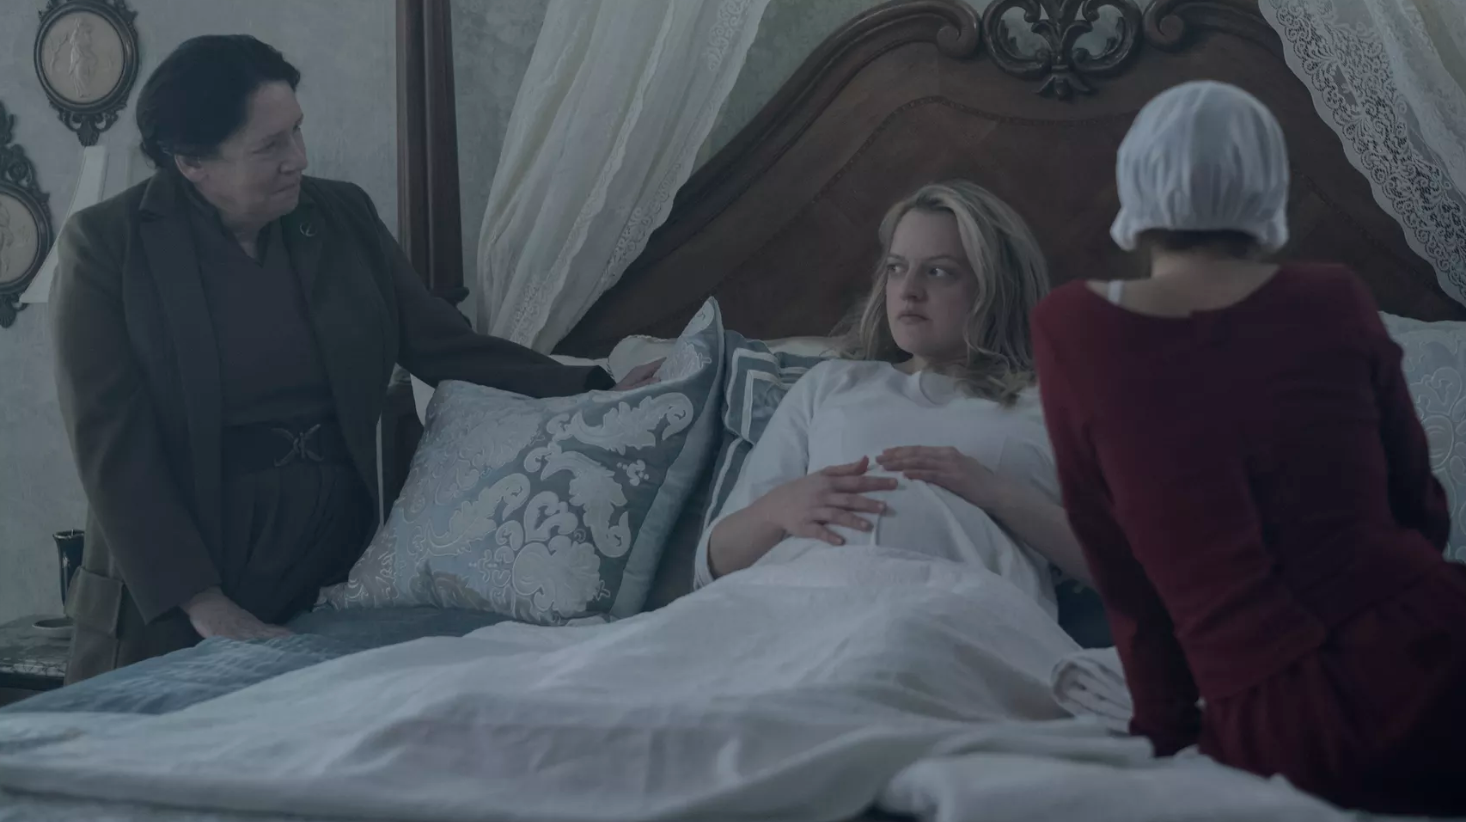 Handmaids tale sex scene.with commander whem she is pregnant